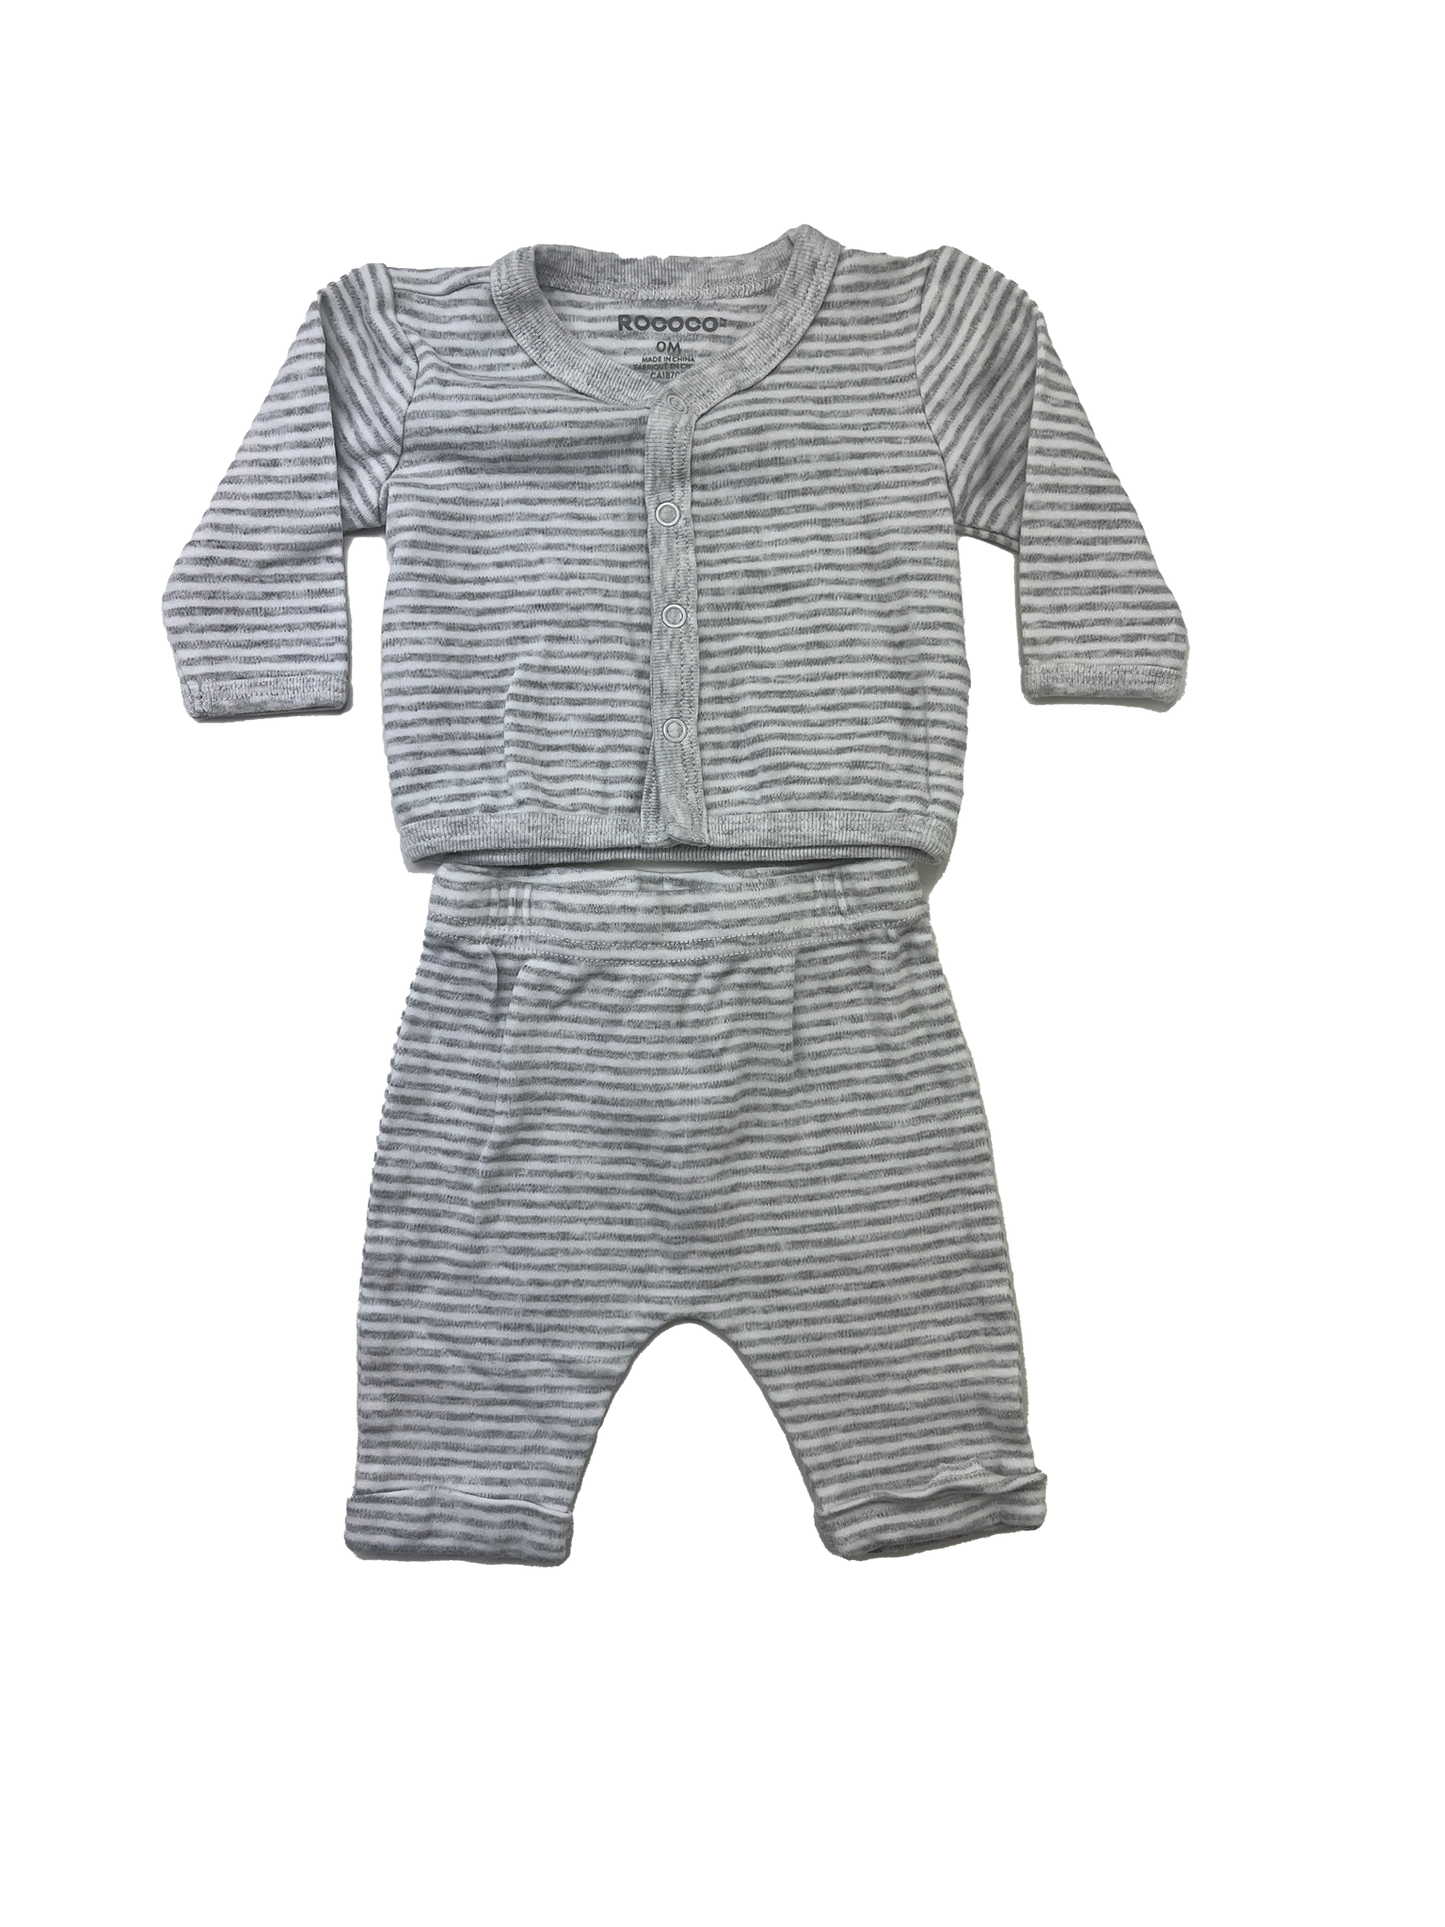 Roco Co Grey & White Striped 2-Piece Set Cardigan and Pants NB